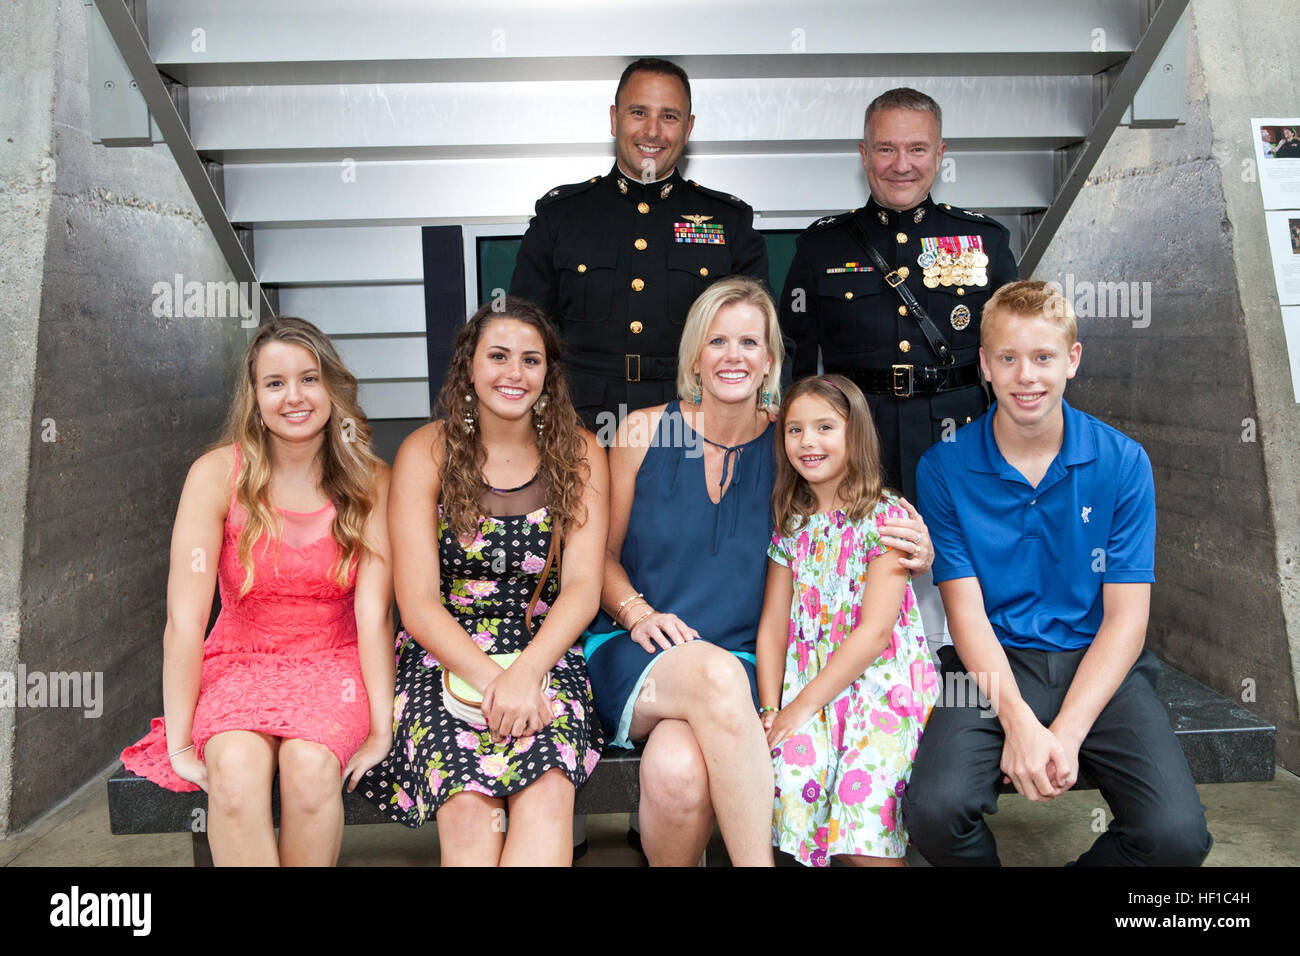 U.S. Marine Corps Maj. Gen. Kenneth F. McKenzie Jr., top right, the Marine Corps representative to the Defense Department's Quadrennial Defense Review and the Sunset Parade host, poses for a photo with a Marine Corps lieutenant colonel and his family during the parade reception at the Women in Military Service for America Memorial at Arlington National Cemetery in Arlington, Va., July 9, 2013. A Sunset Parade was held every Tuesday during the summer months. (U.S. Marine Corps photo by Cpl. Tia Dufour/Released) Sunset Parade 130709-M-KS211-029 Stock Photo